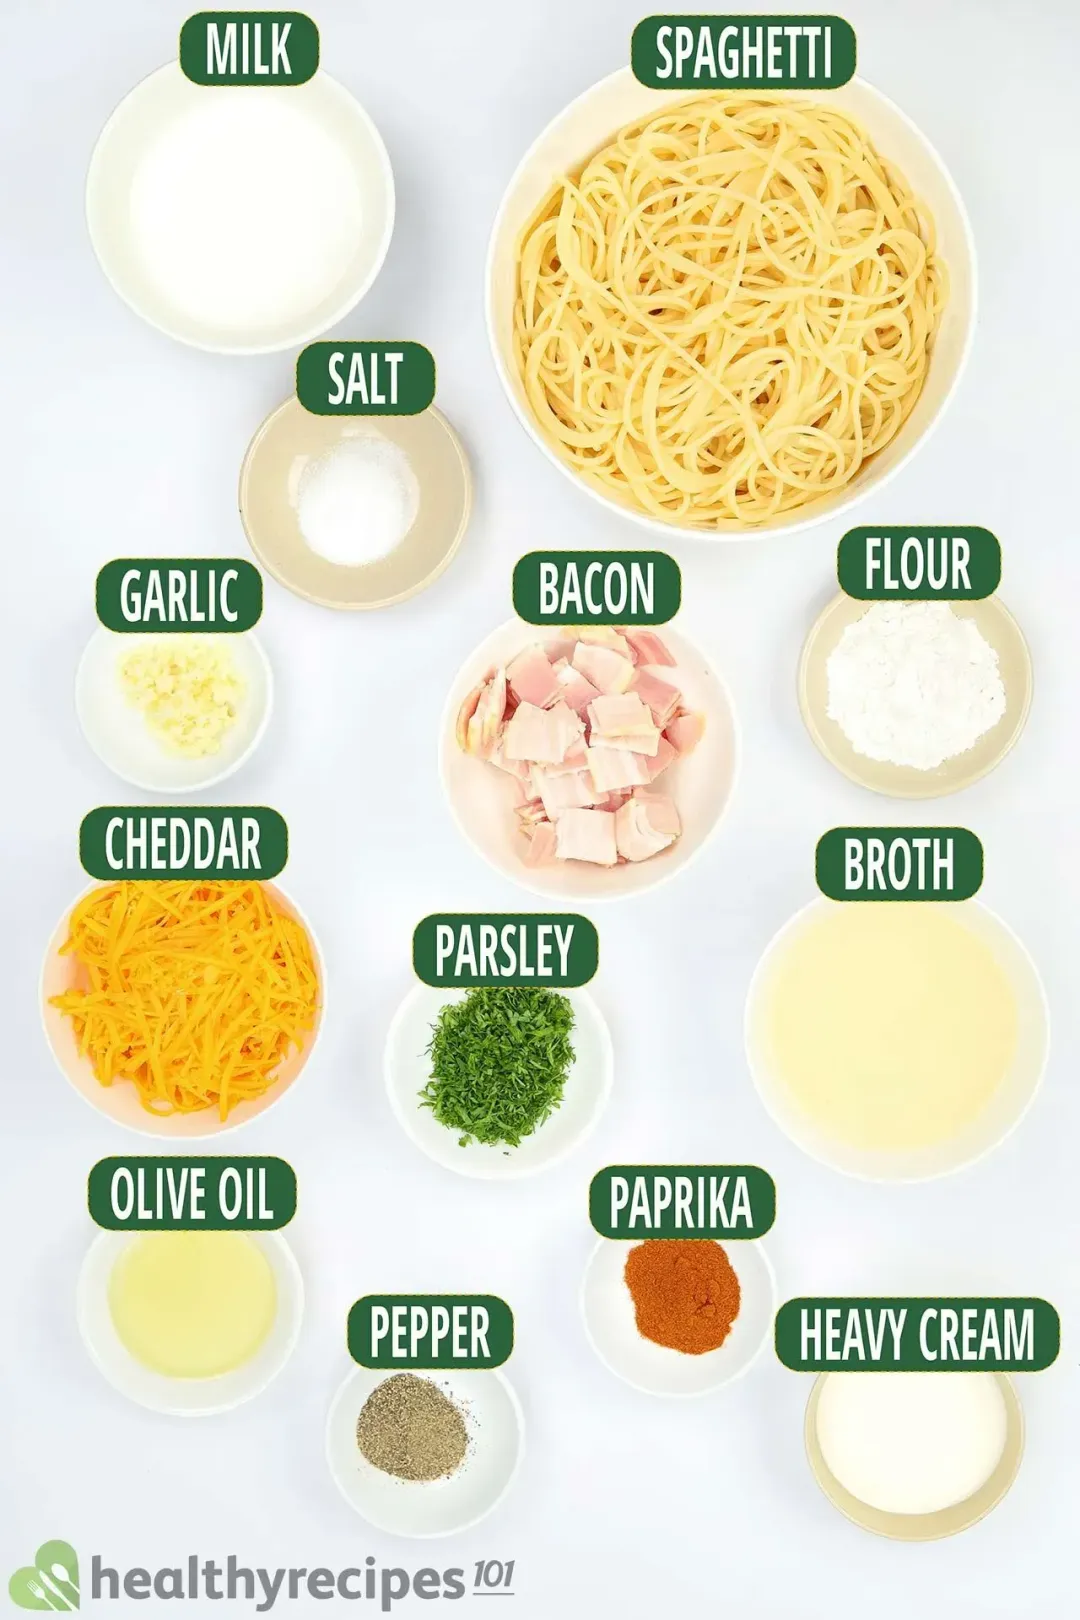 Ingredients for Cheese Spaghetti